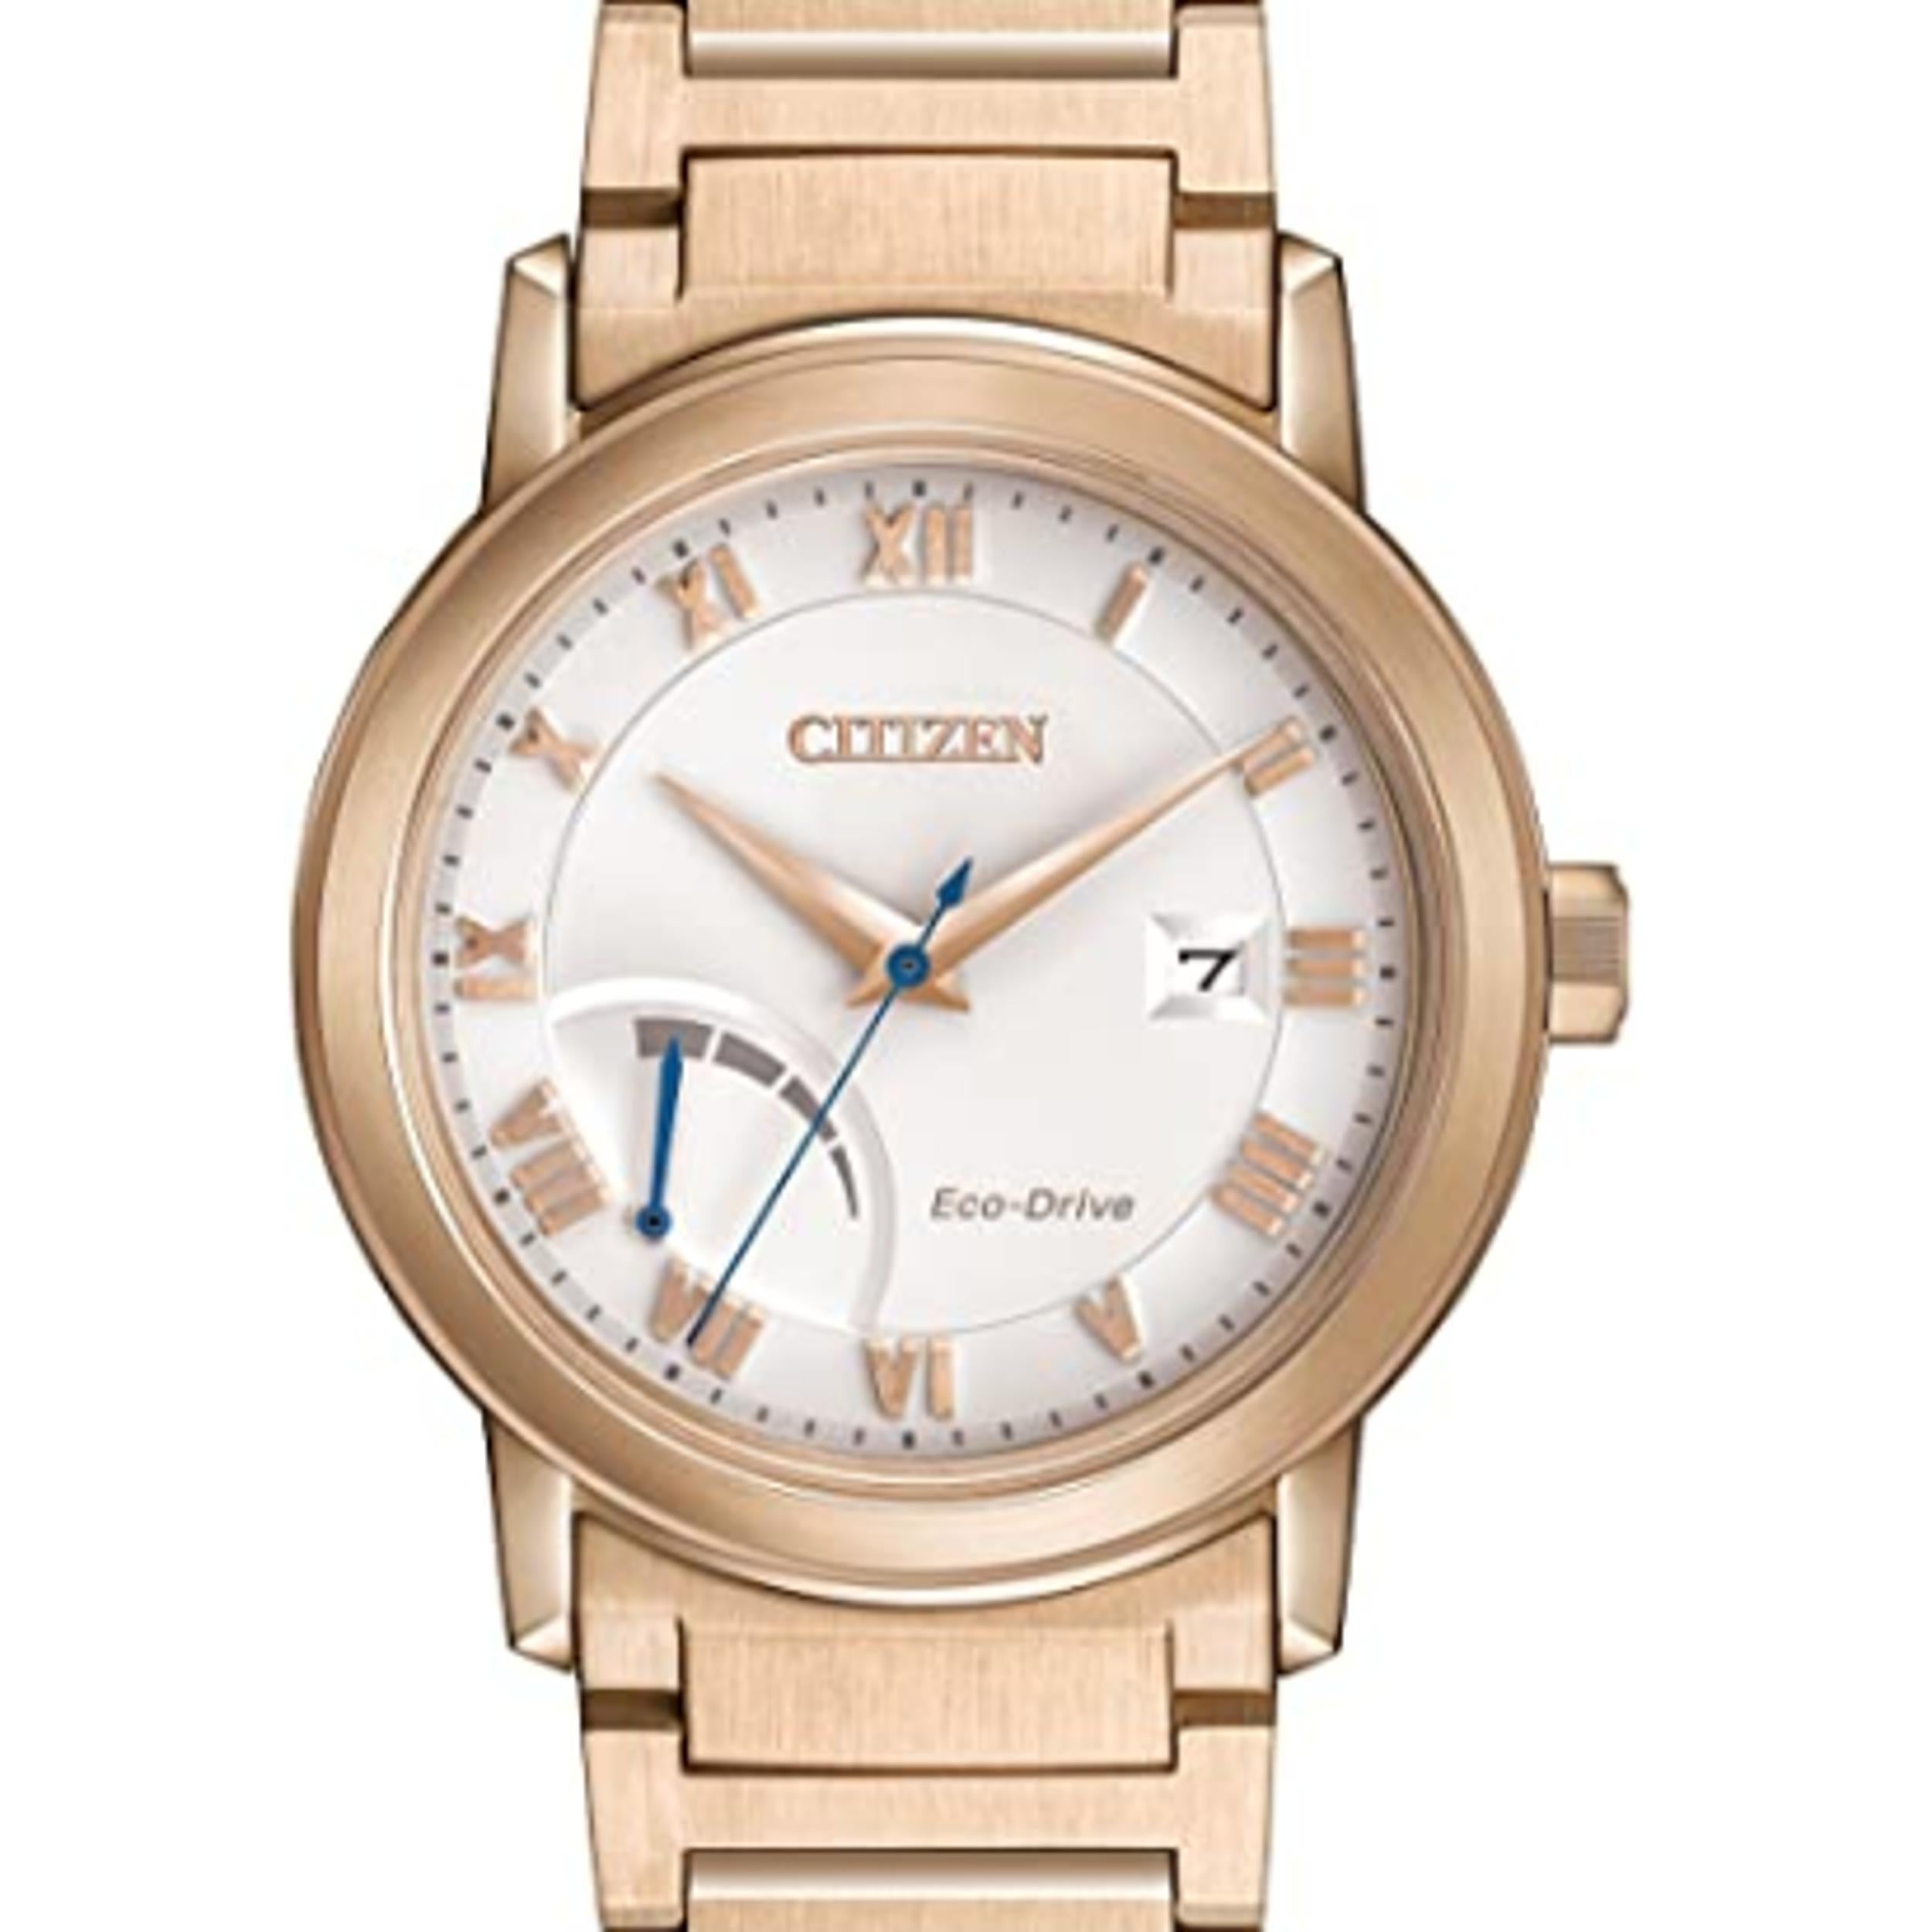 citizen eco drive watch meaning